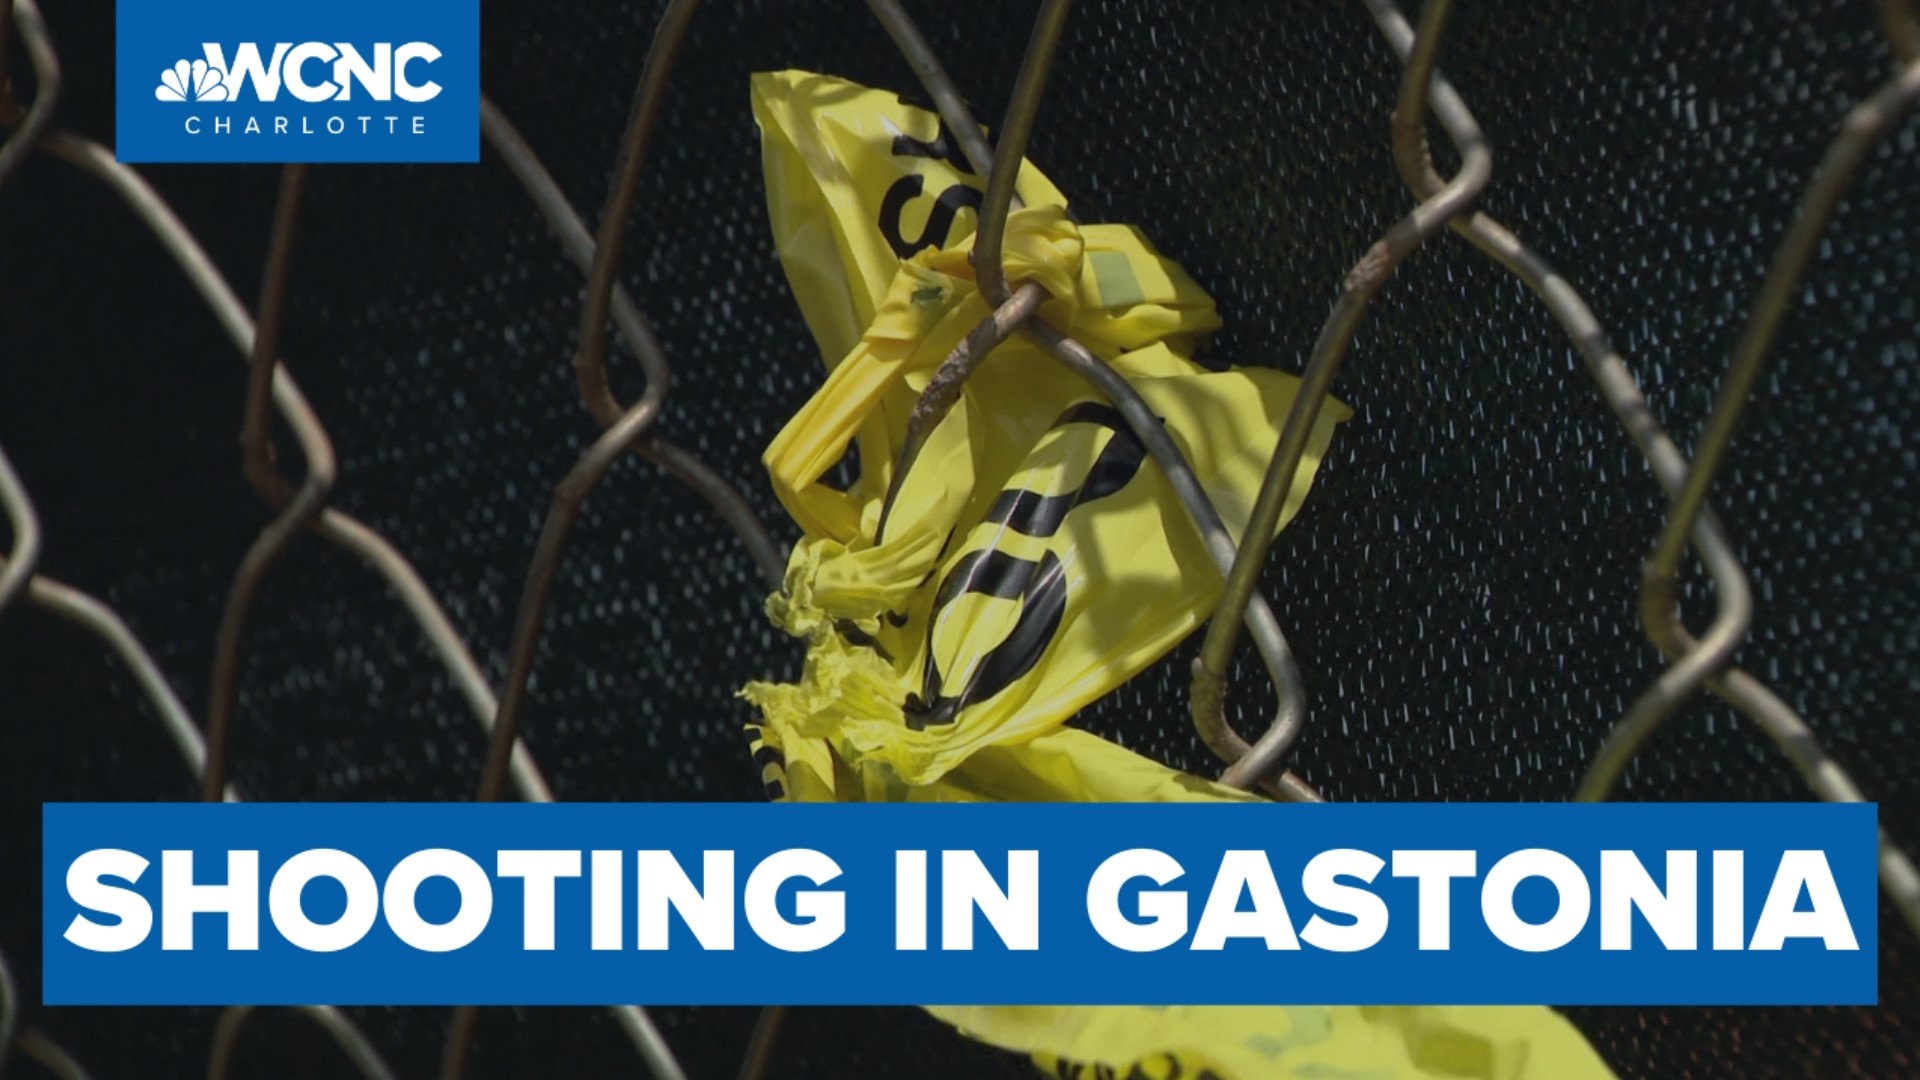 Two 14-year-old boys were seriously injured in a shooting in Gastonia Tuesday afternoon, police said.